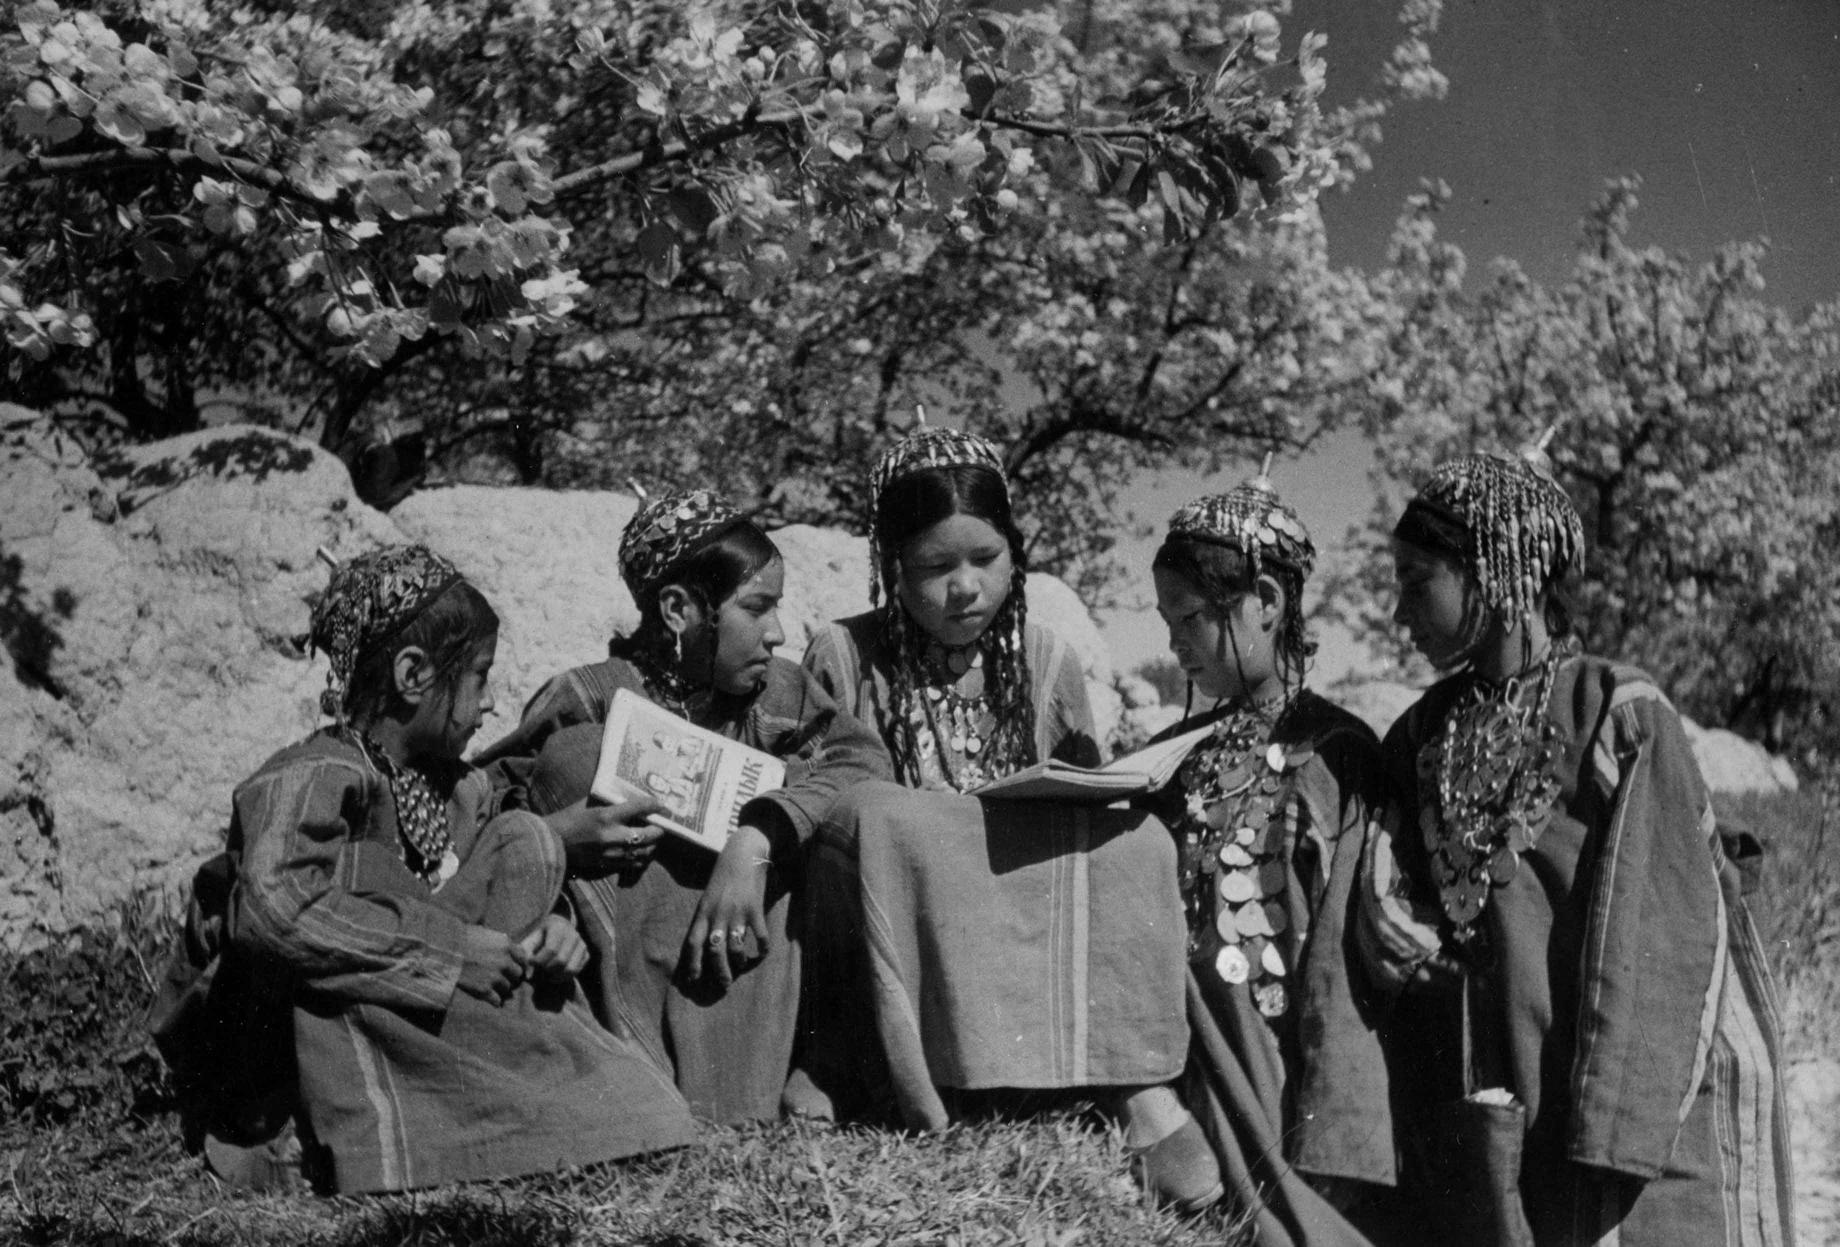 Girls in traditional clothing reading together under a tree